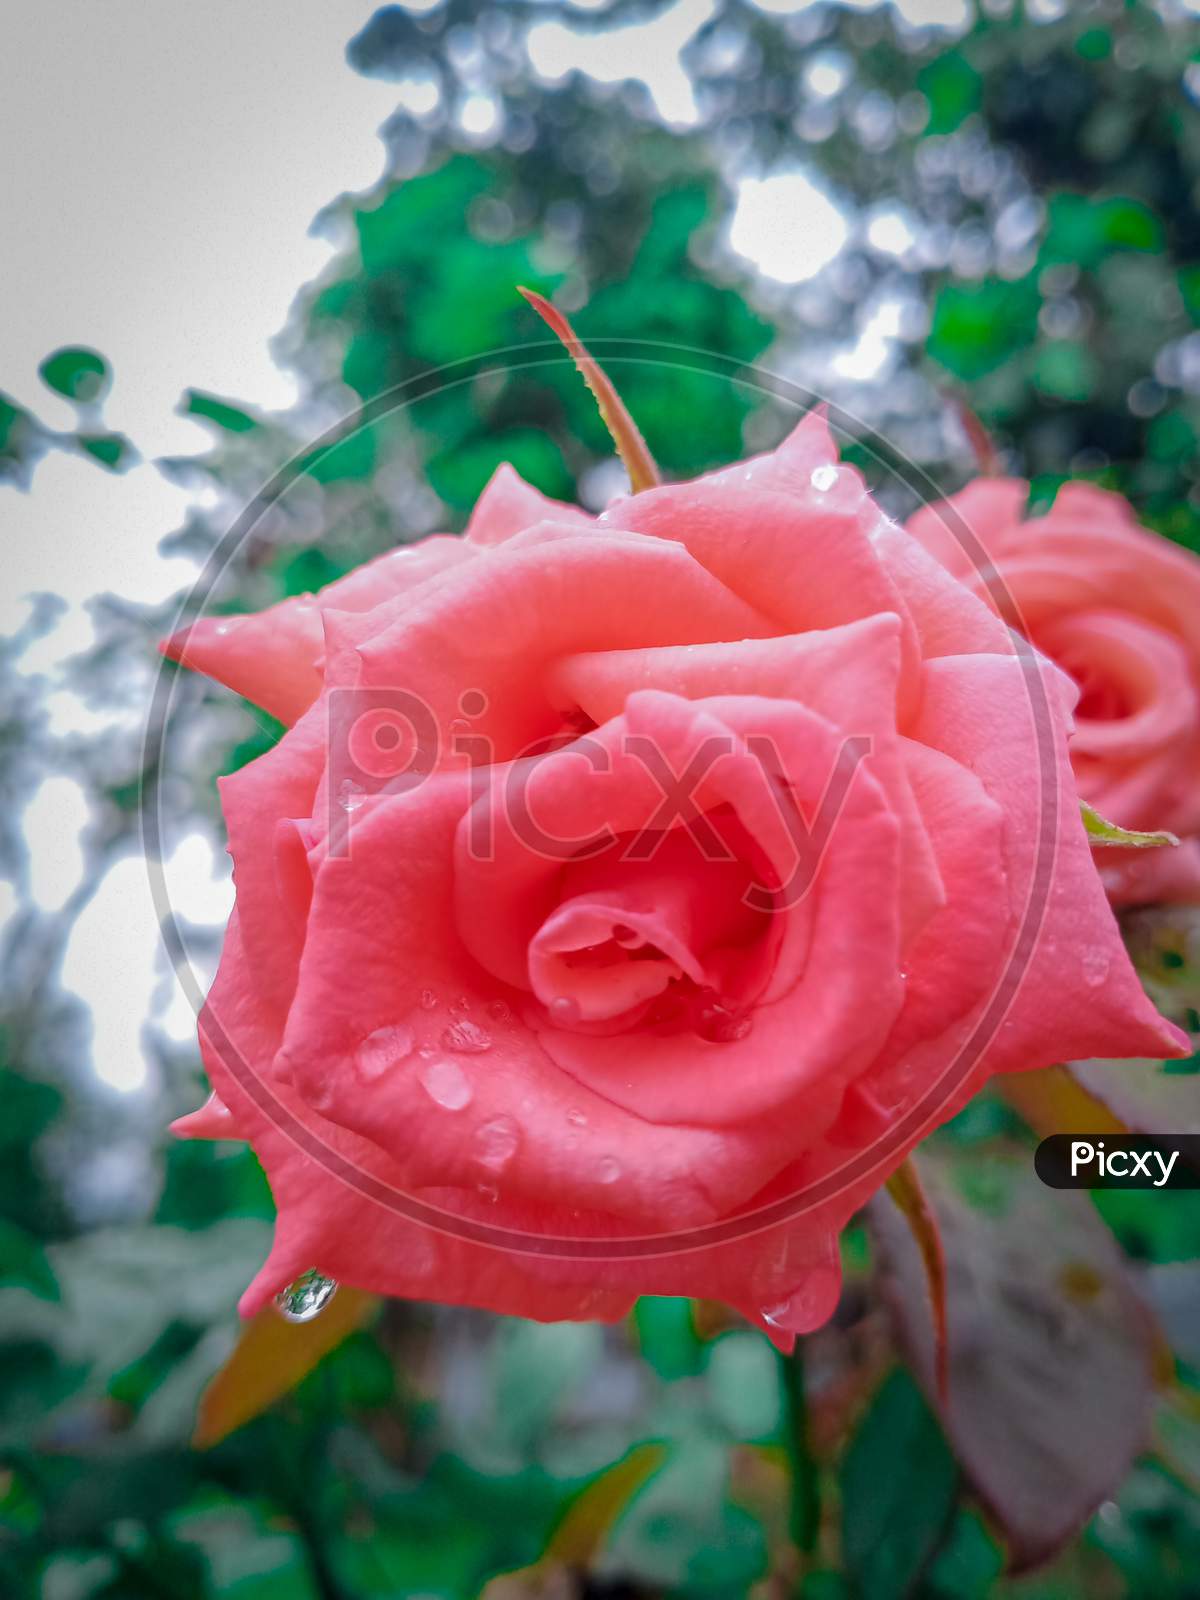 Pinky Alive Rose To have A Great day